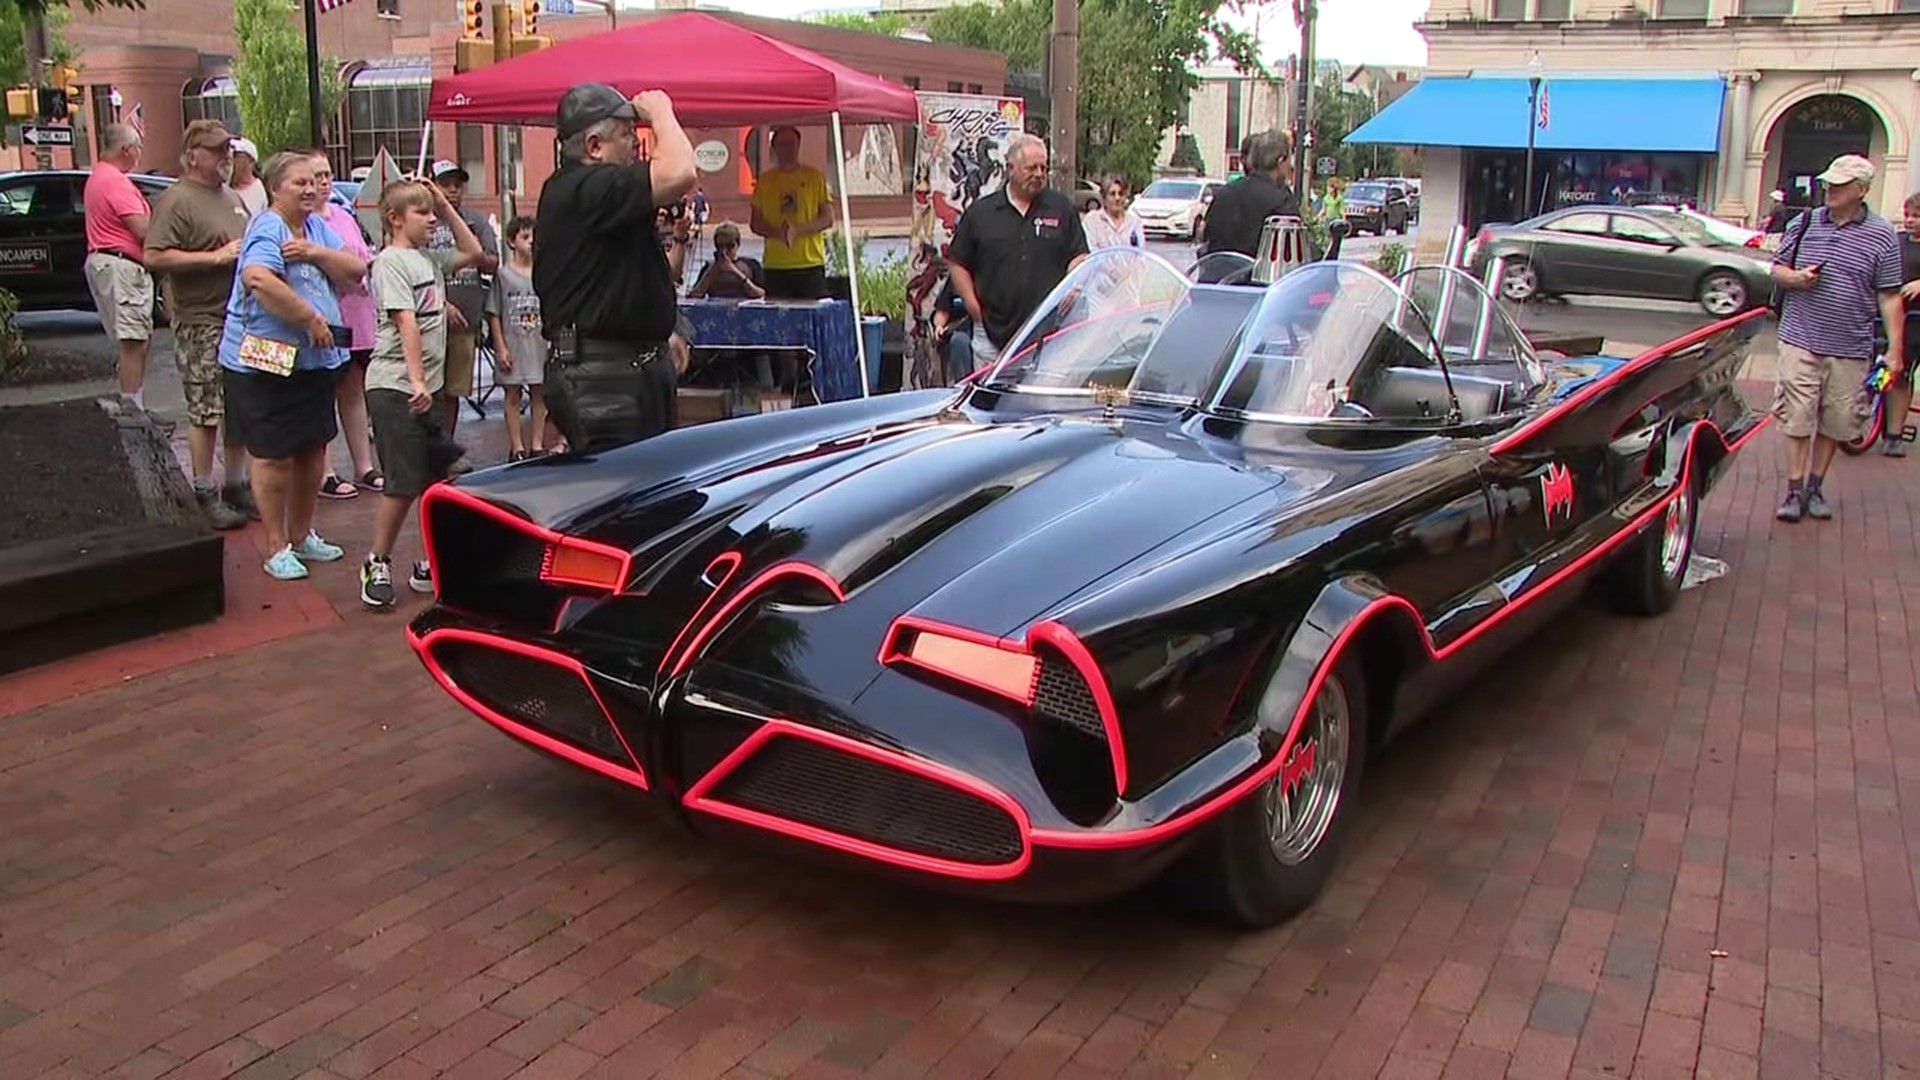 The batmobile caused quite a stir Friday night at First Friday in Williamsport.